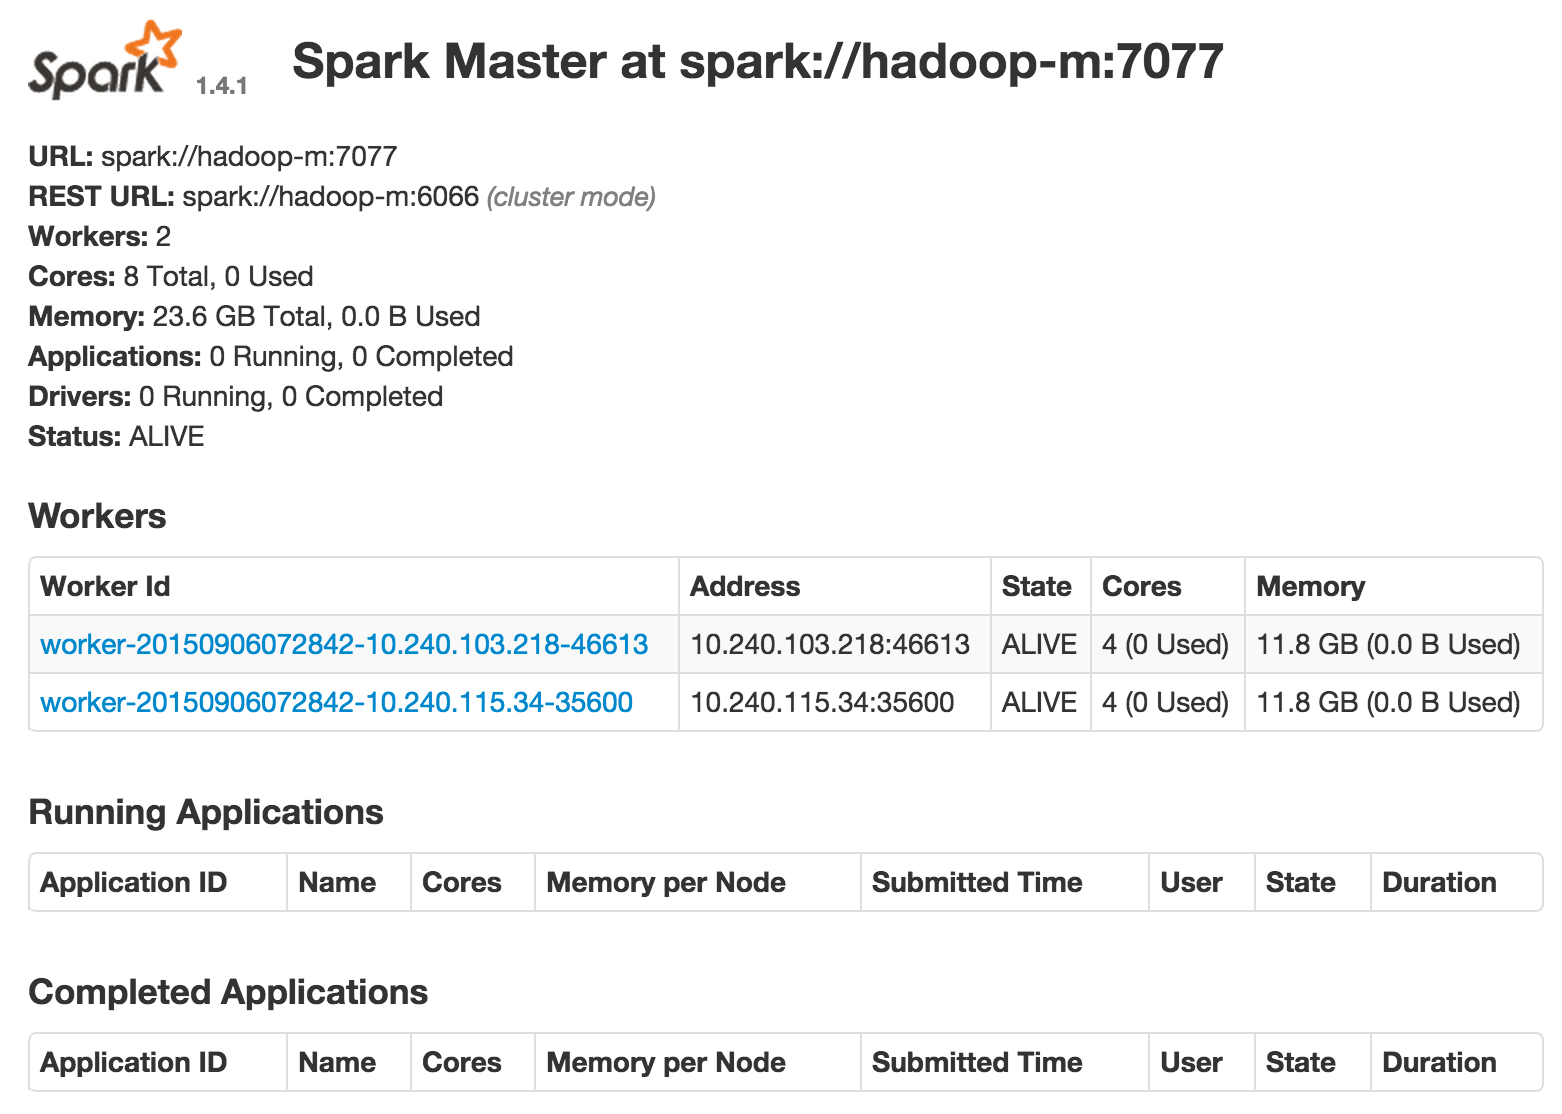 The Spark console shows two worker instances